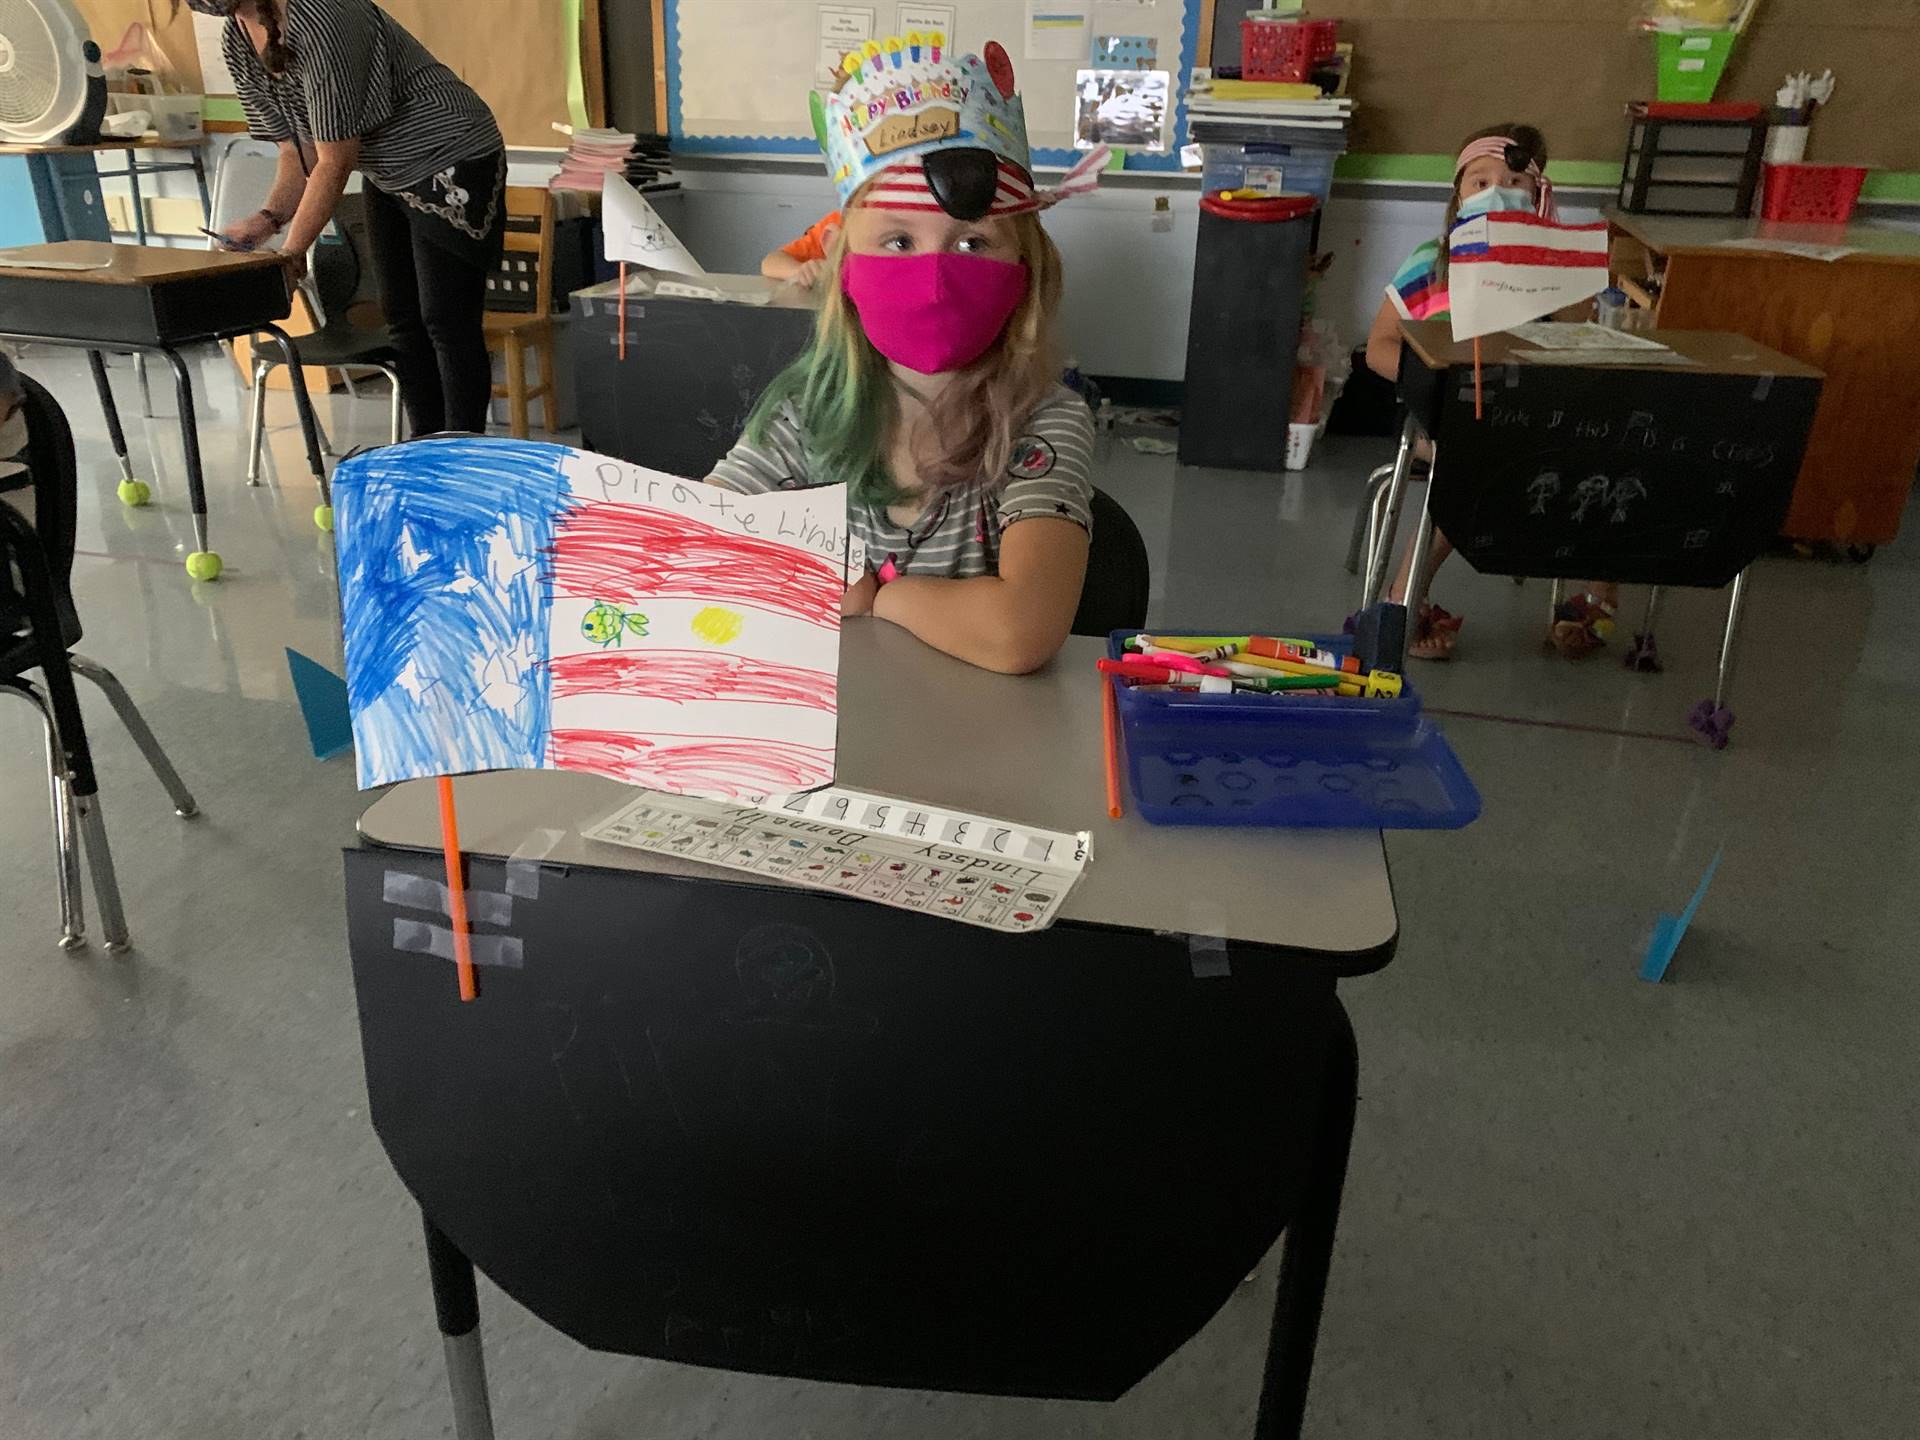 a student sitting at a desk decorated as a pirate ship.